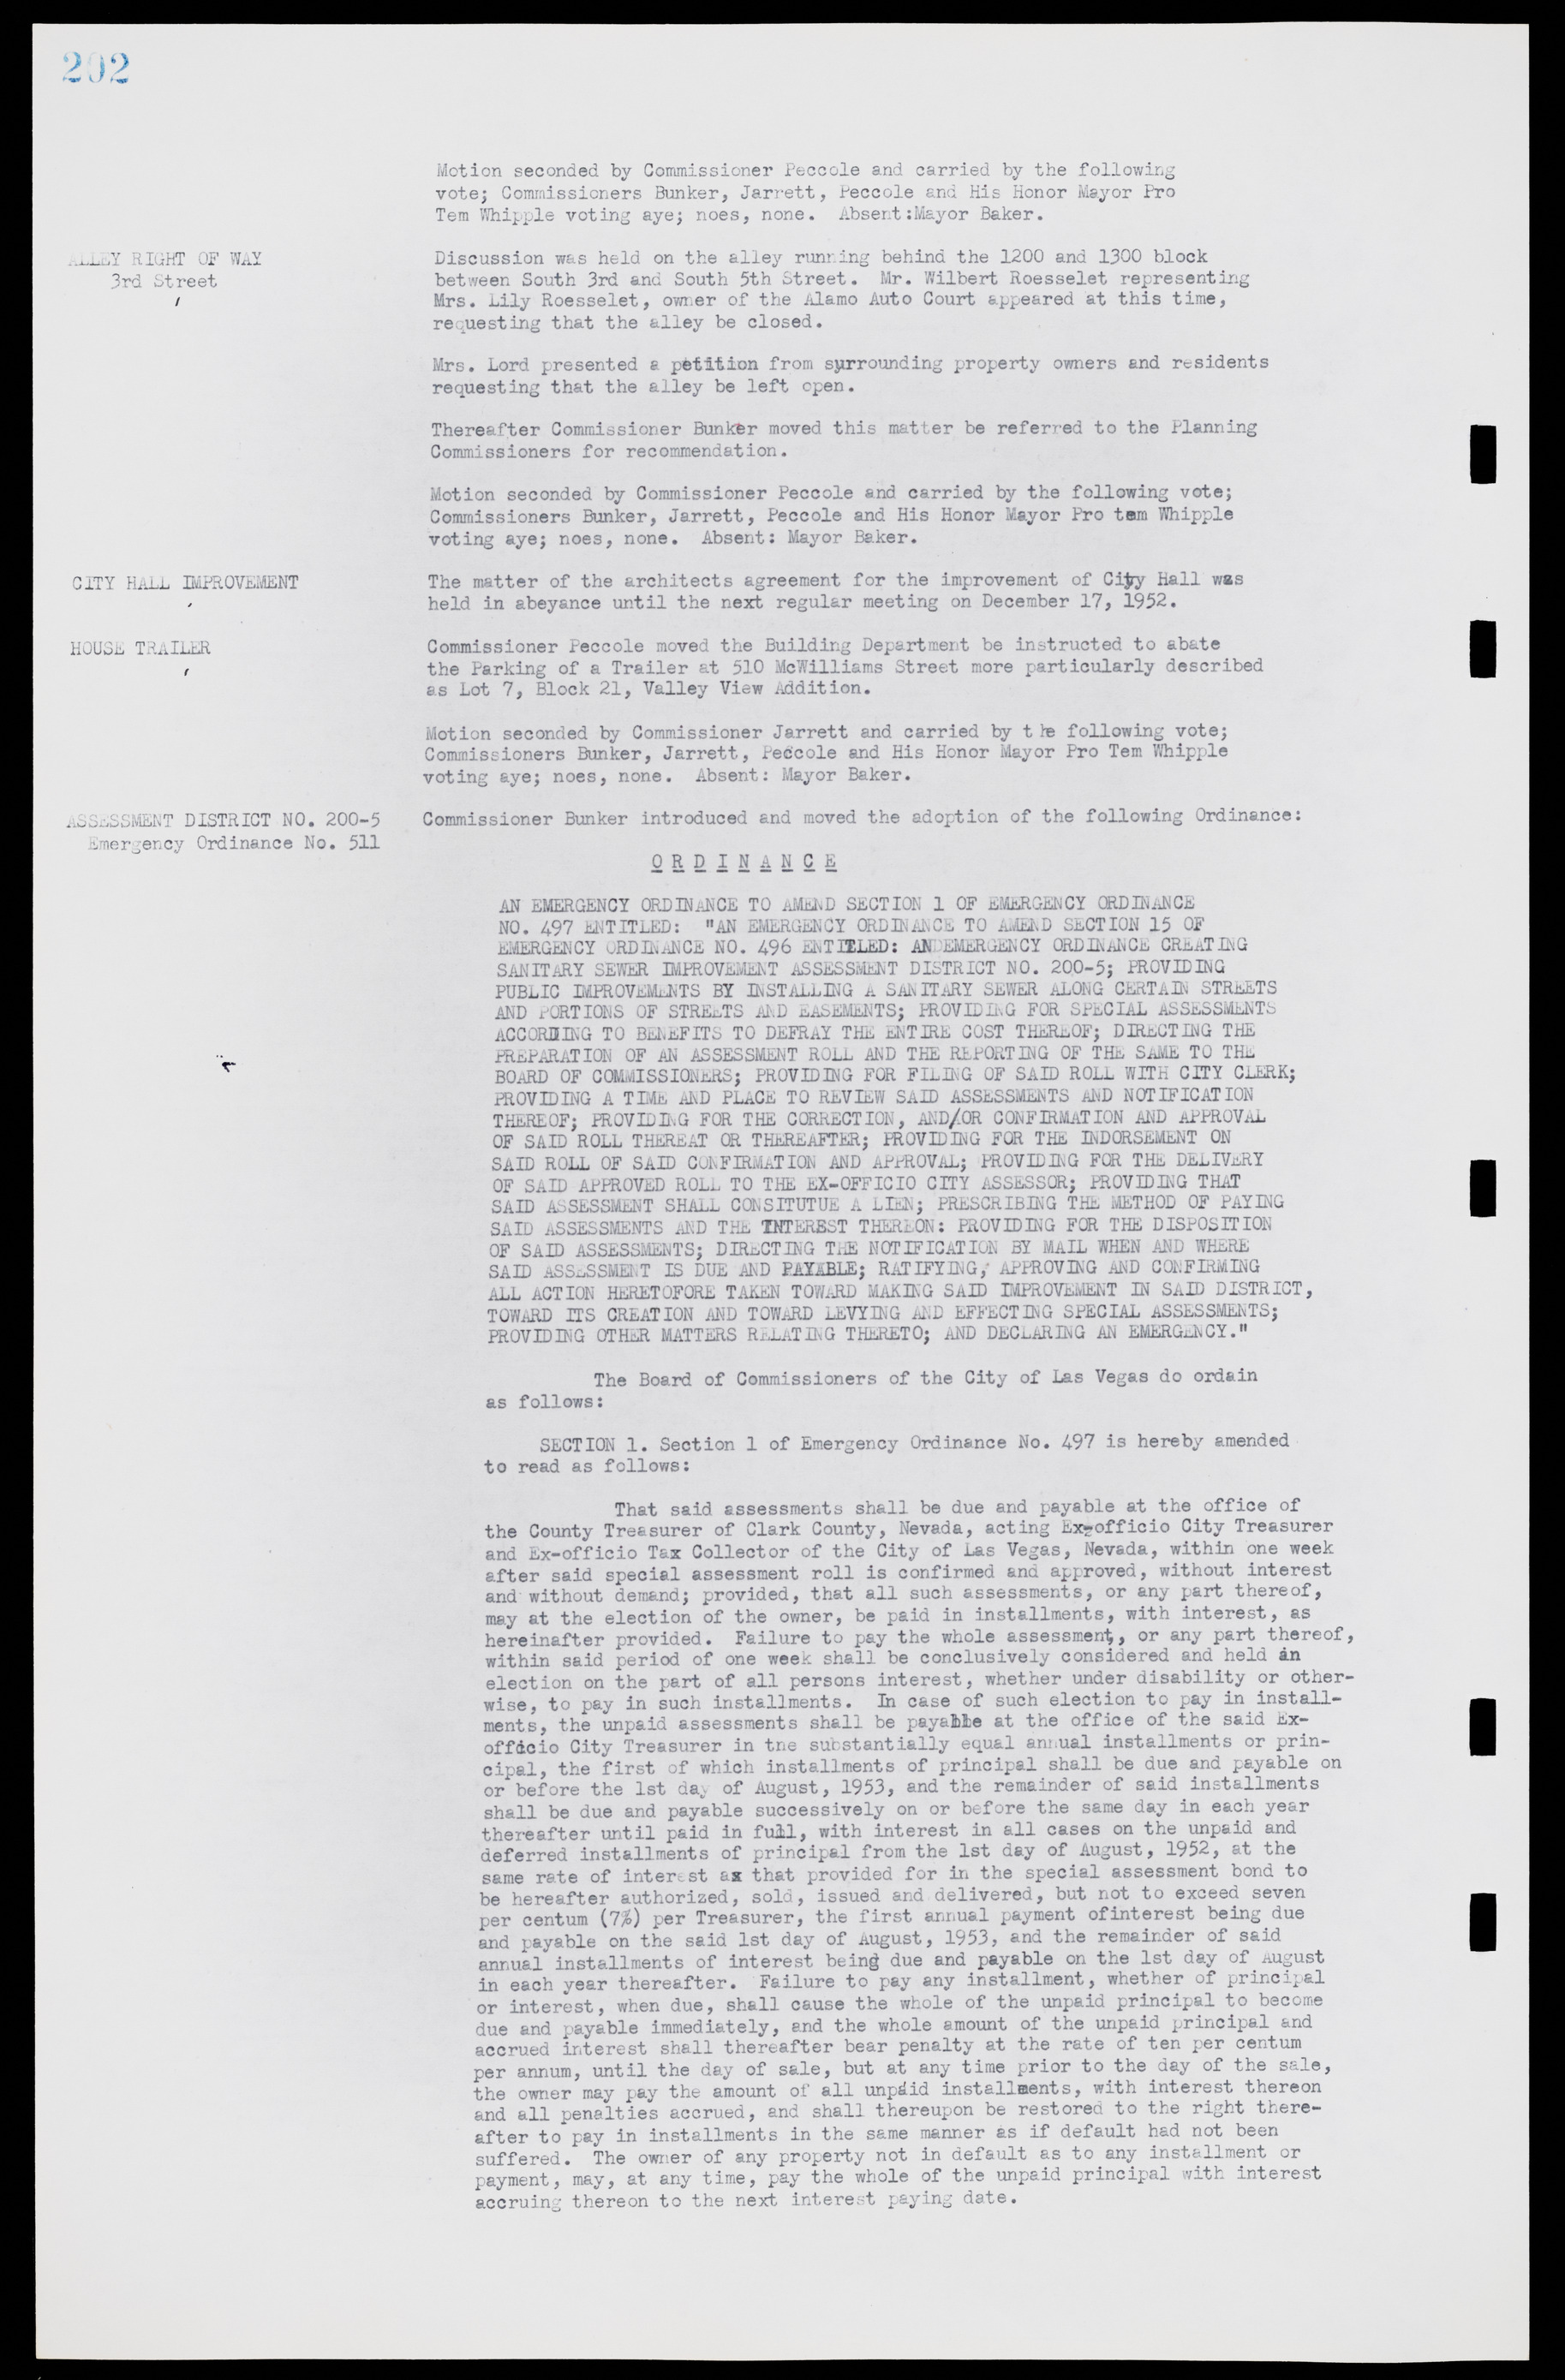 Las Vegas City Commission Minutes, May 26, 1952 to February 17, 1954, lvc000008-216